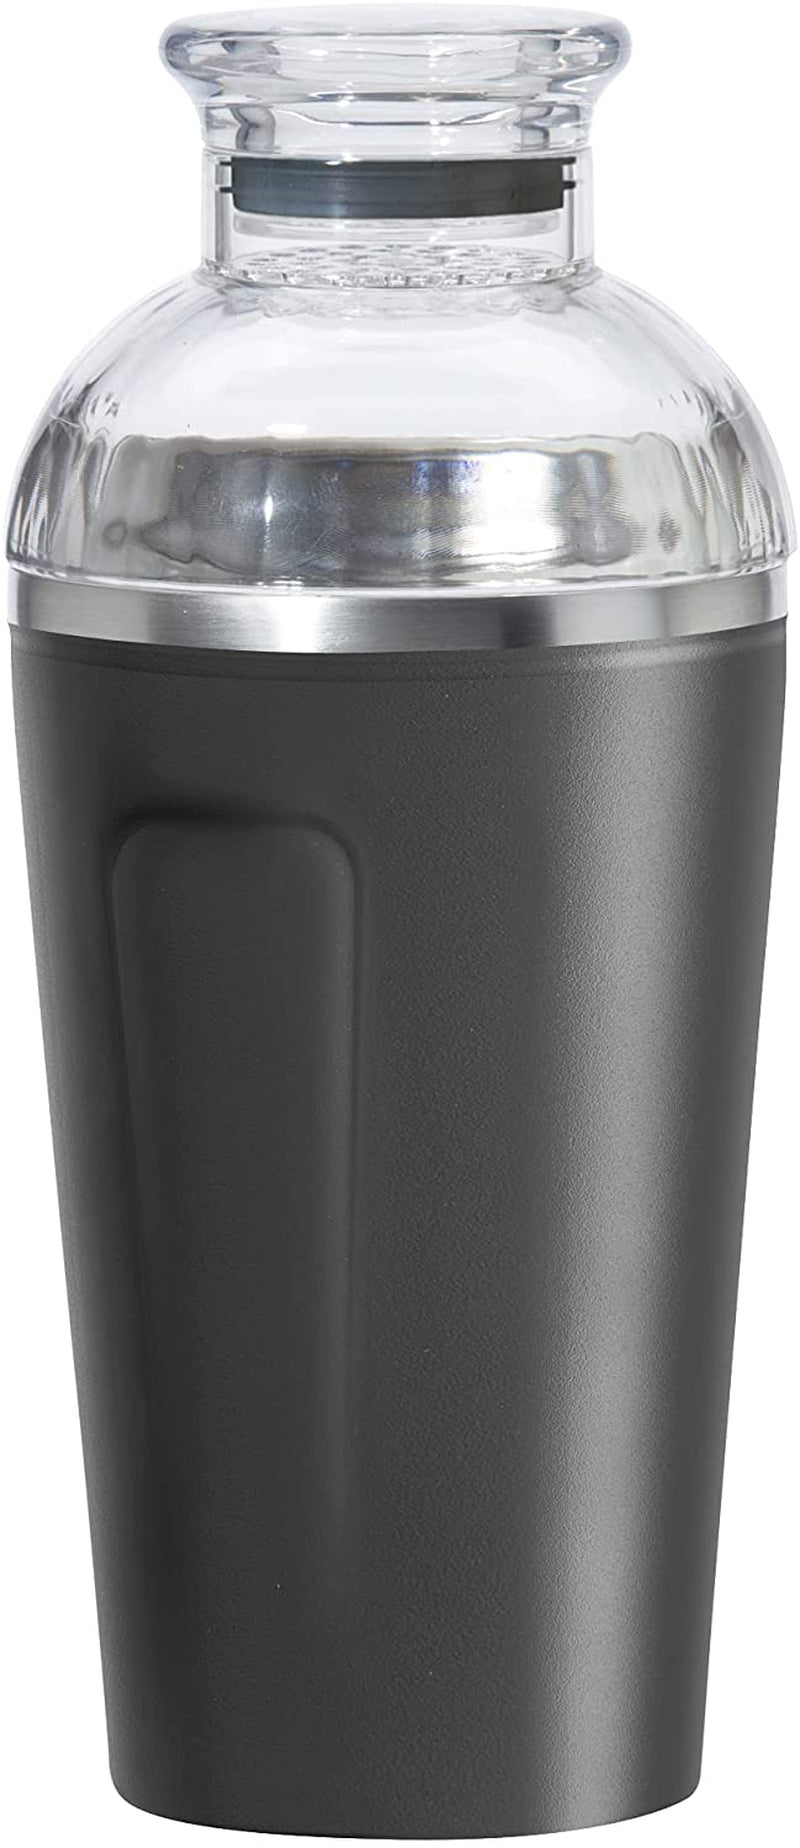 Oggi Groove Insulated Cocktail Shaker-17Oz Double Wall Vacuum Insulated Stainless Steel Shaker, Tritan Lid Has Built in Strainer, Ideal Cocktail, Martini Shaker, Margarita Shaker, Gold (7404.4) Home & Garden > Kitchen & Dining > Barware Oggi Black 17-Ounce 